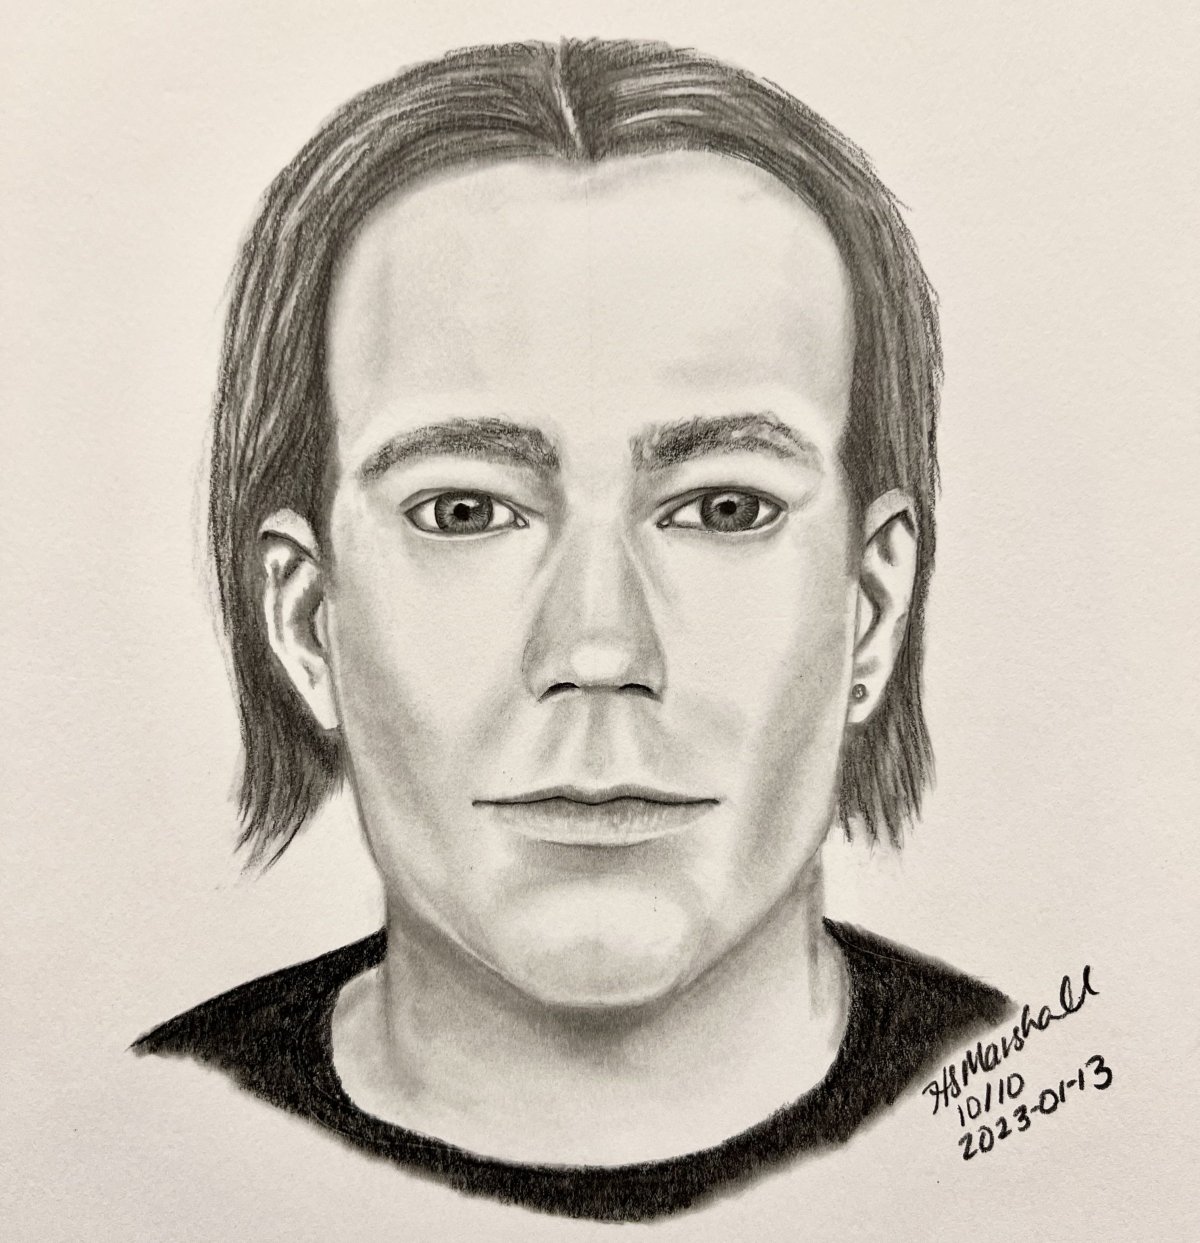 Warman RCMP have released a sketch of a man who attempted to abduct a girl last month, hoping it helps identify him.